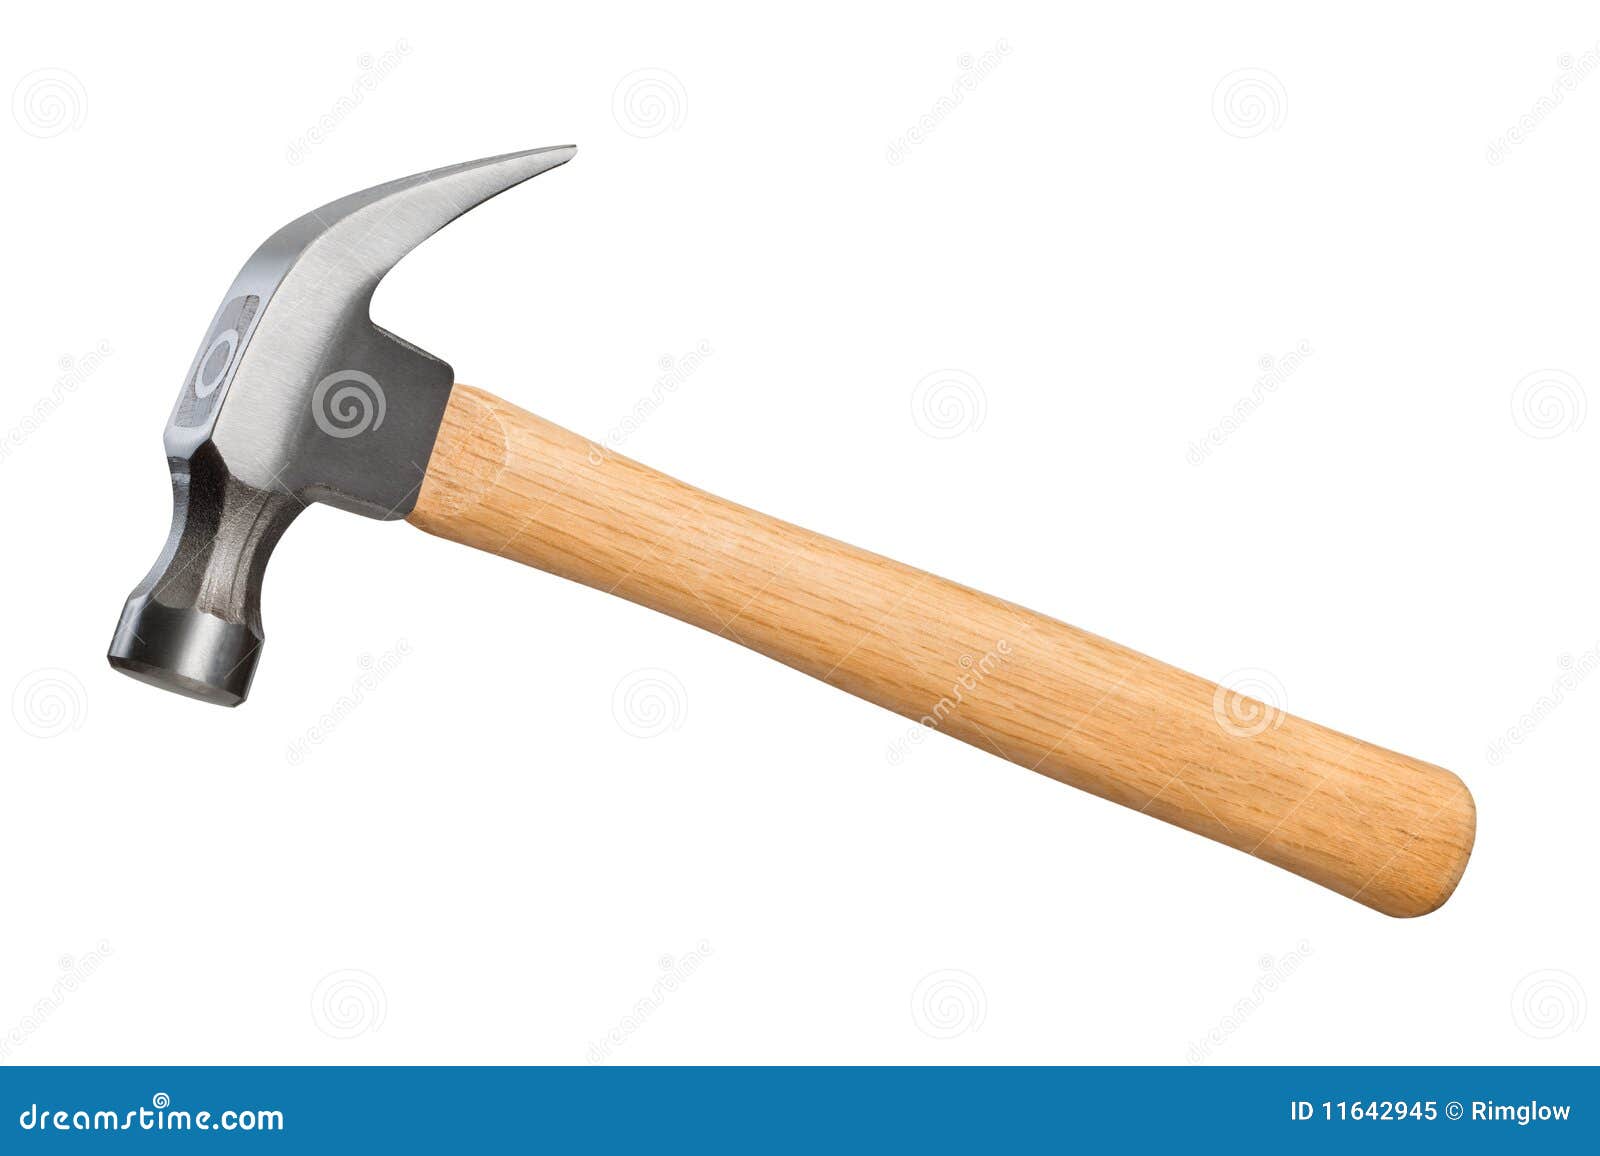 hammer (with clipping path)